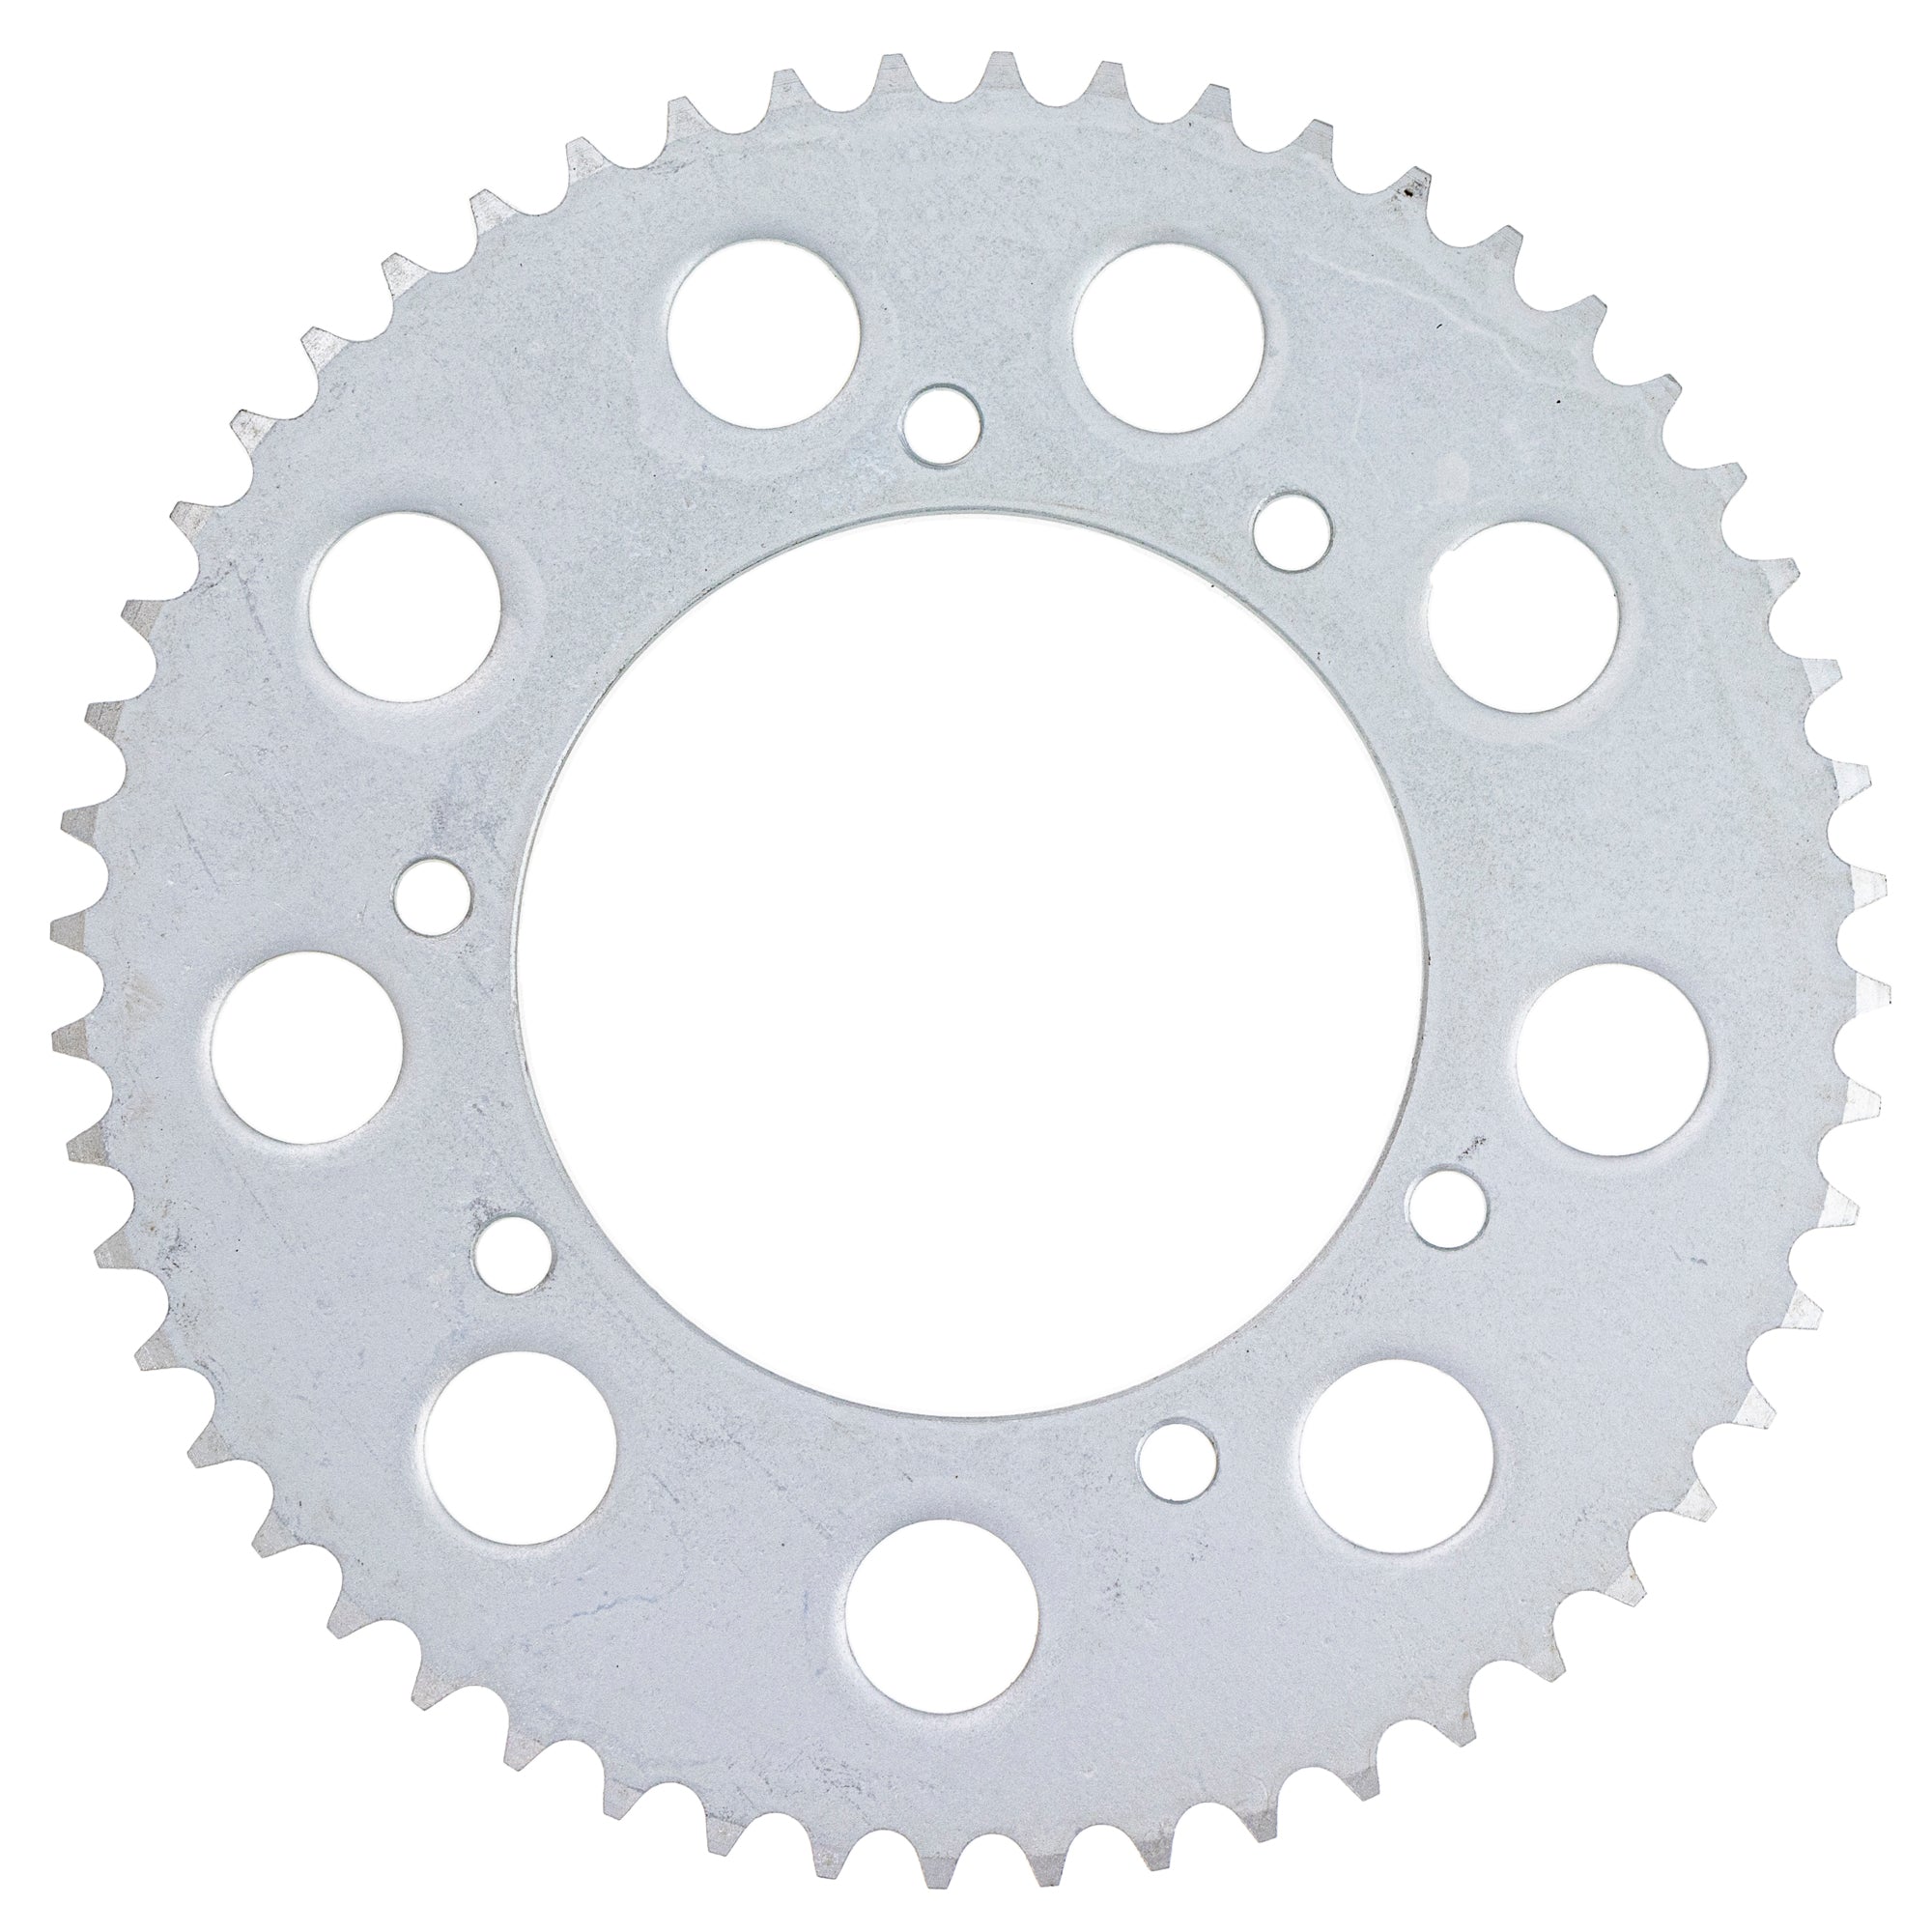 420 Front 11T Rear 52T Tooth Drive Sprocket Kit for Peugeot XR6 50